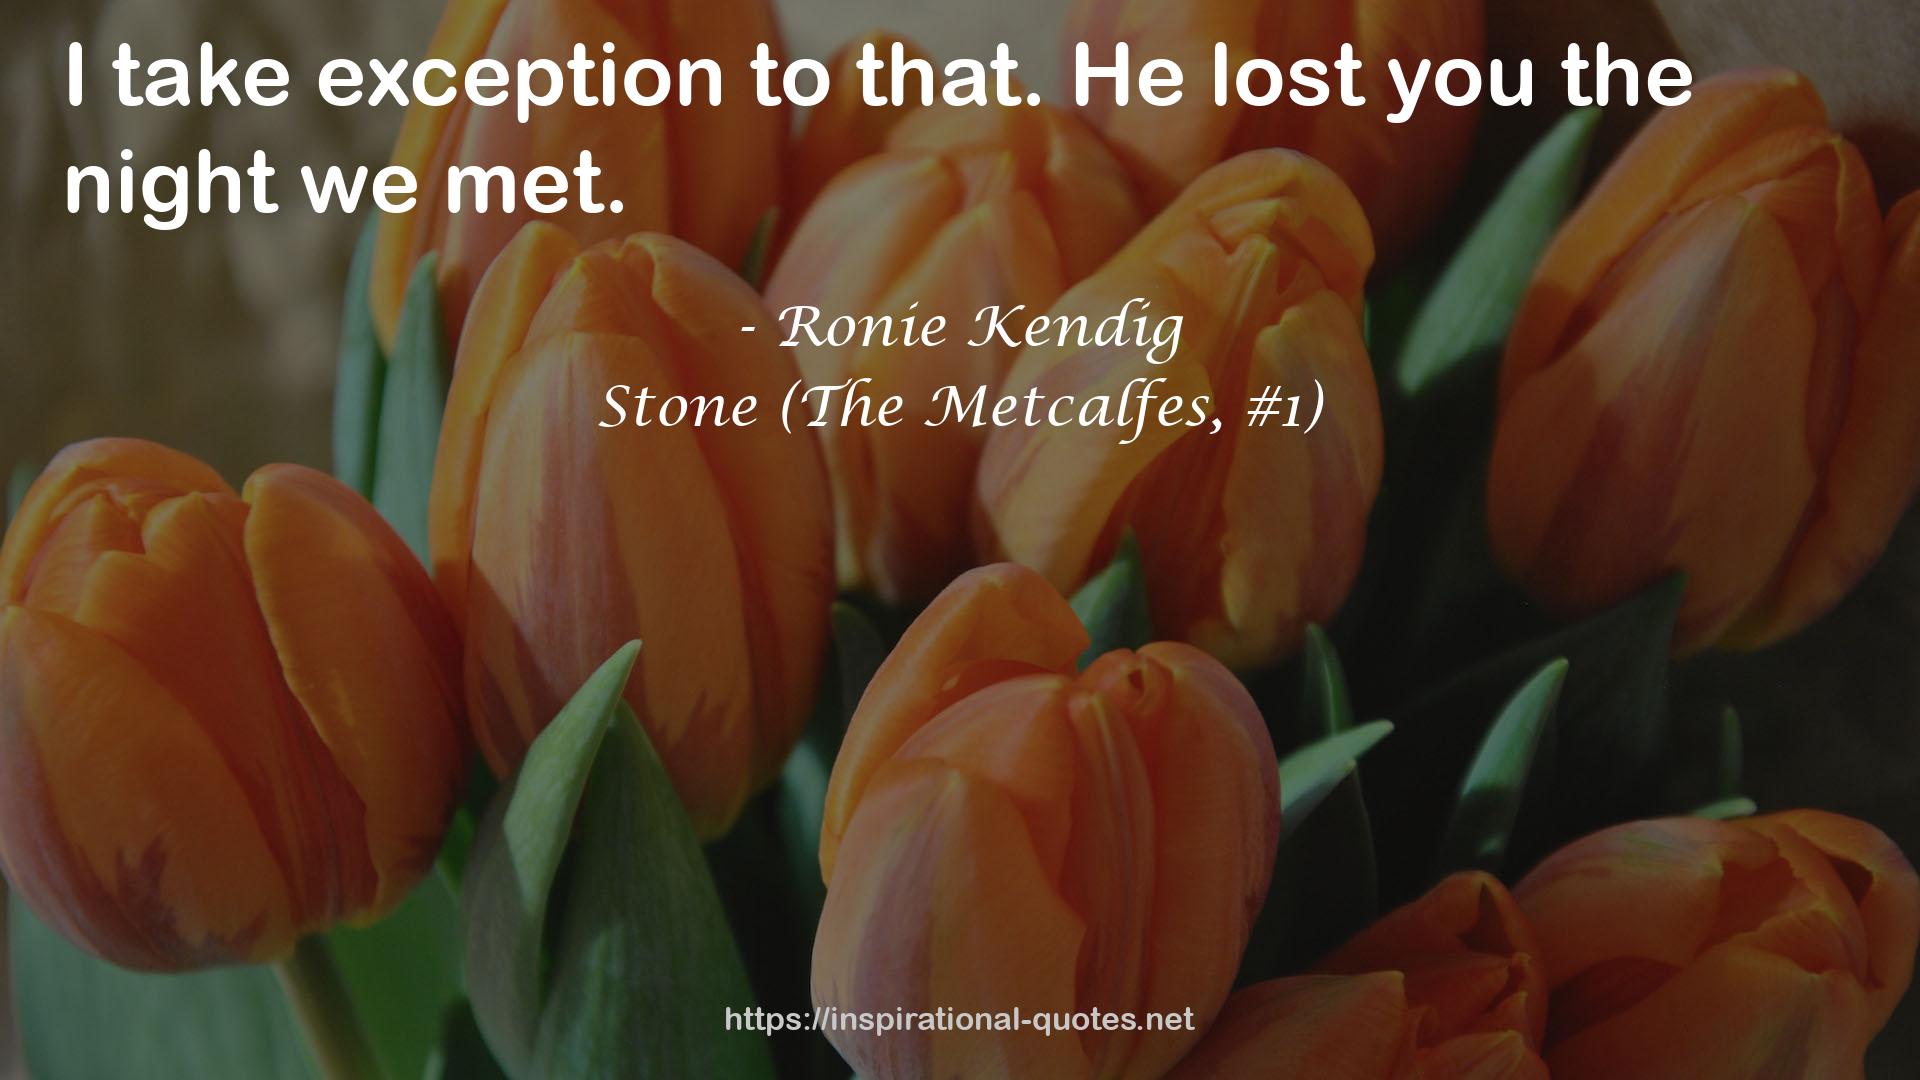 Stone (The Metcalfes, #1) QUOTES